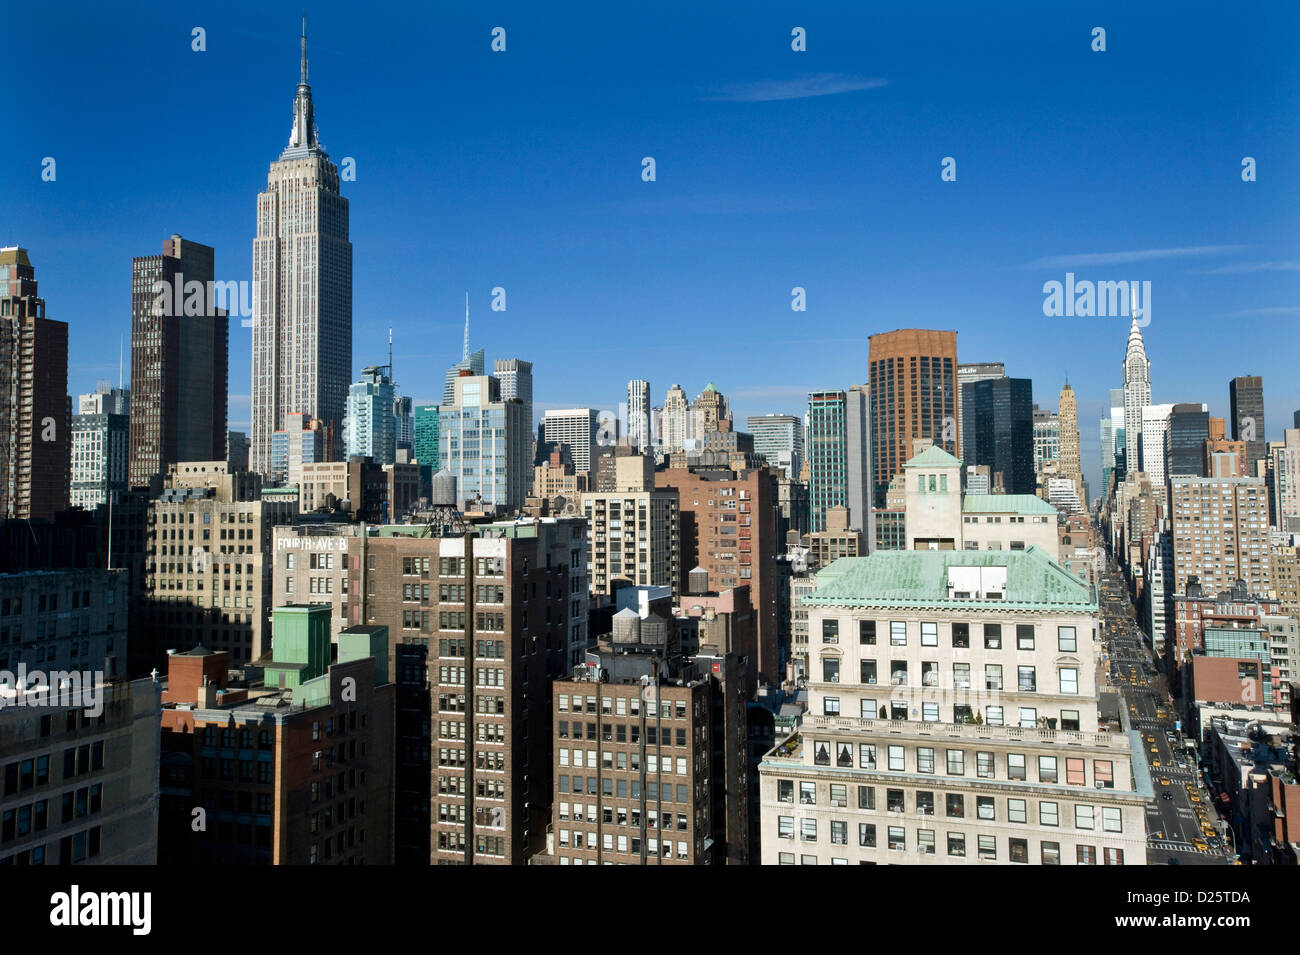 The view down Lexington Avenue,  Manhattan, New York, USA with Chrysler Building and Empire State Building on the skyline. Stock Photo